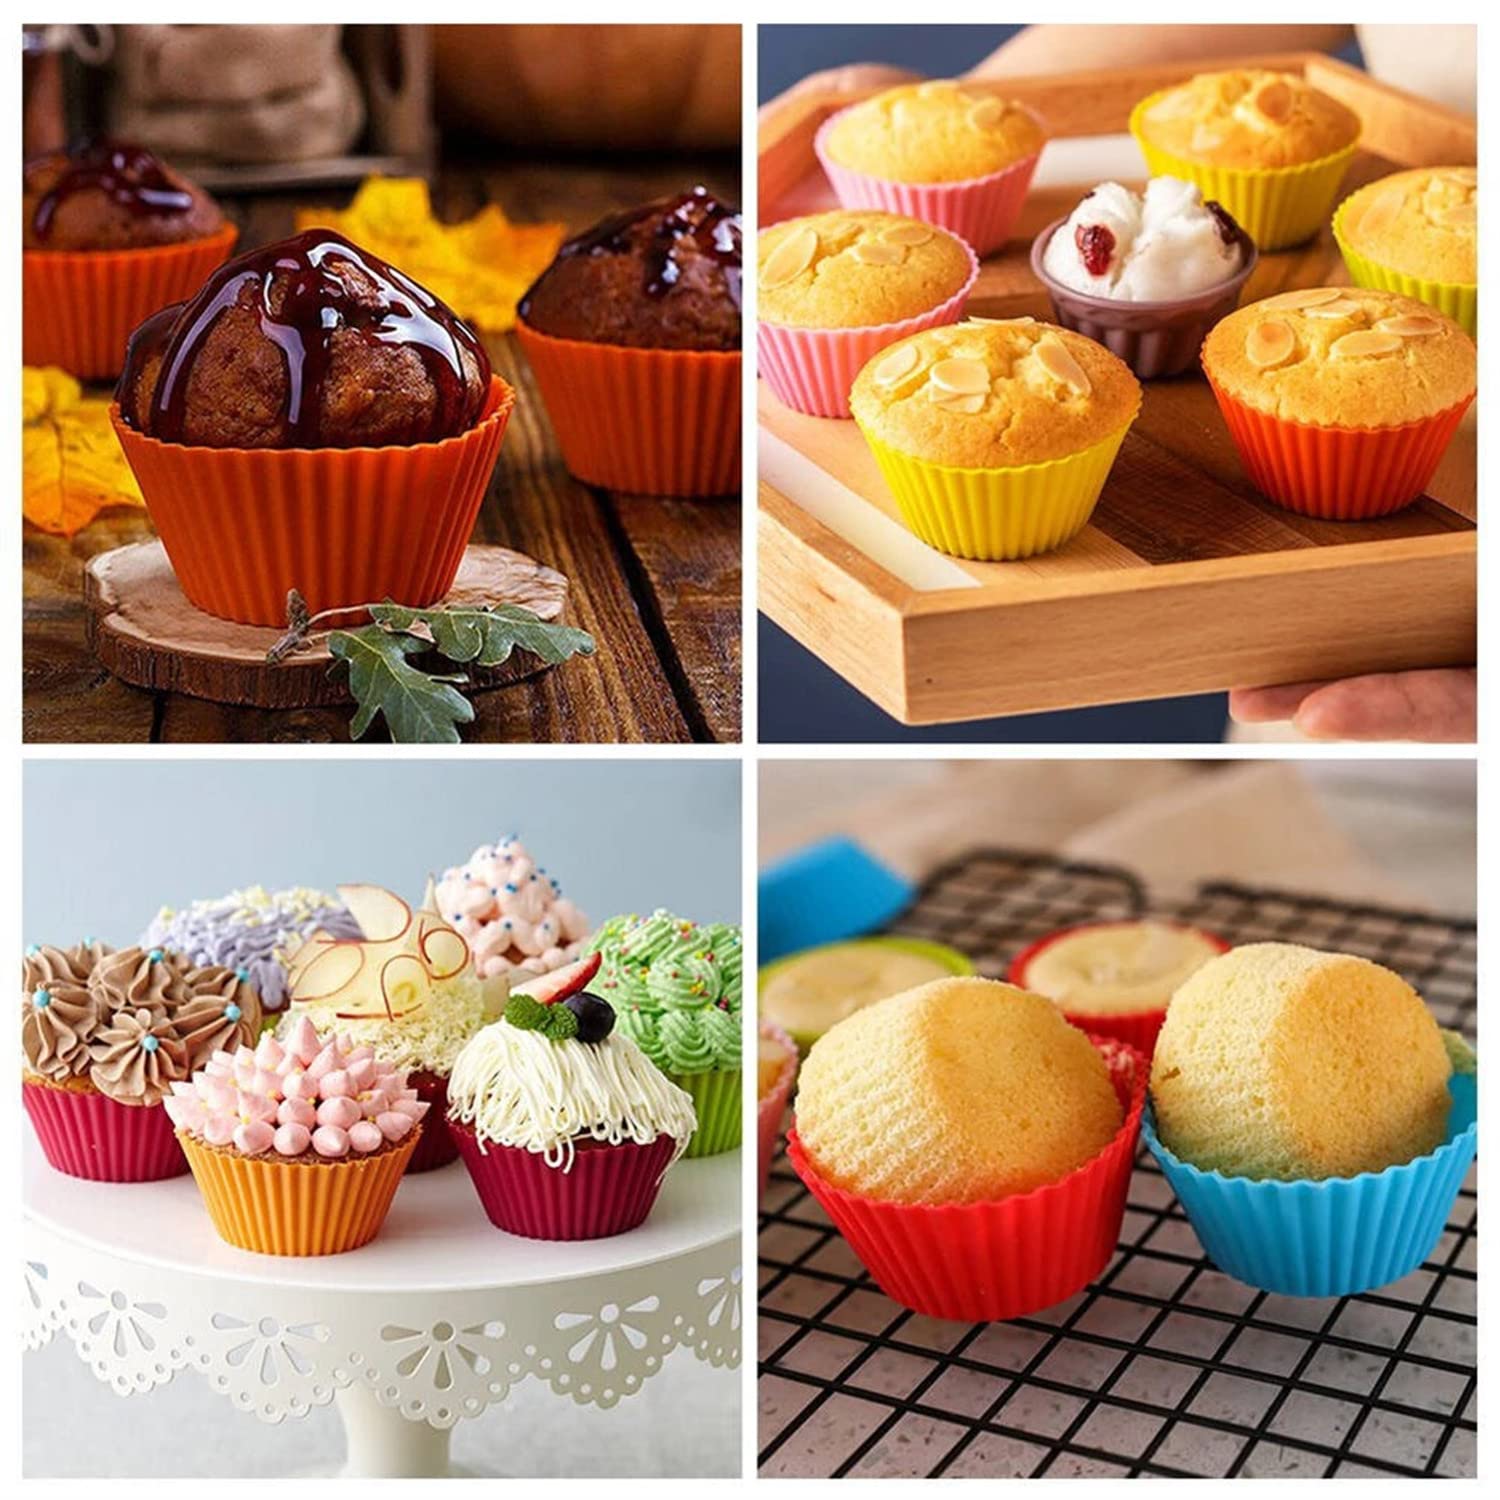 Silicone Cupcake Liners 24PCS,Reusable Non-Stick Muffin Cup Cake Molds Standard,Baking Cup Liners,6 Colors to Choose from